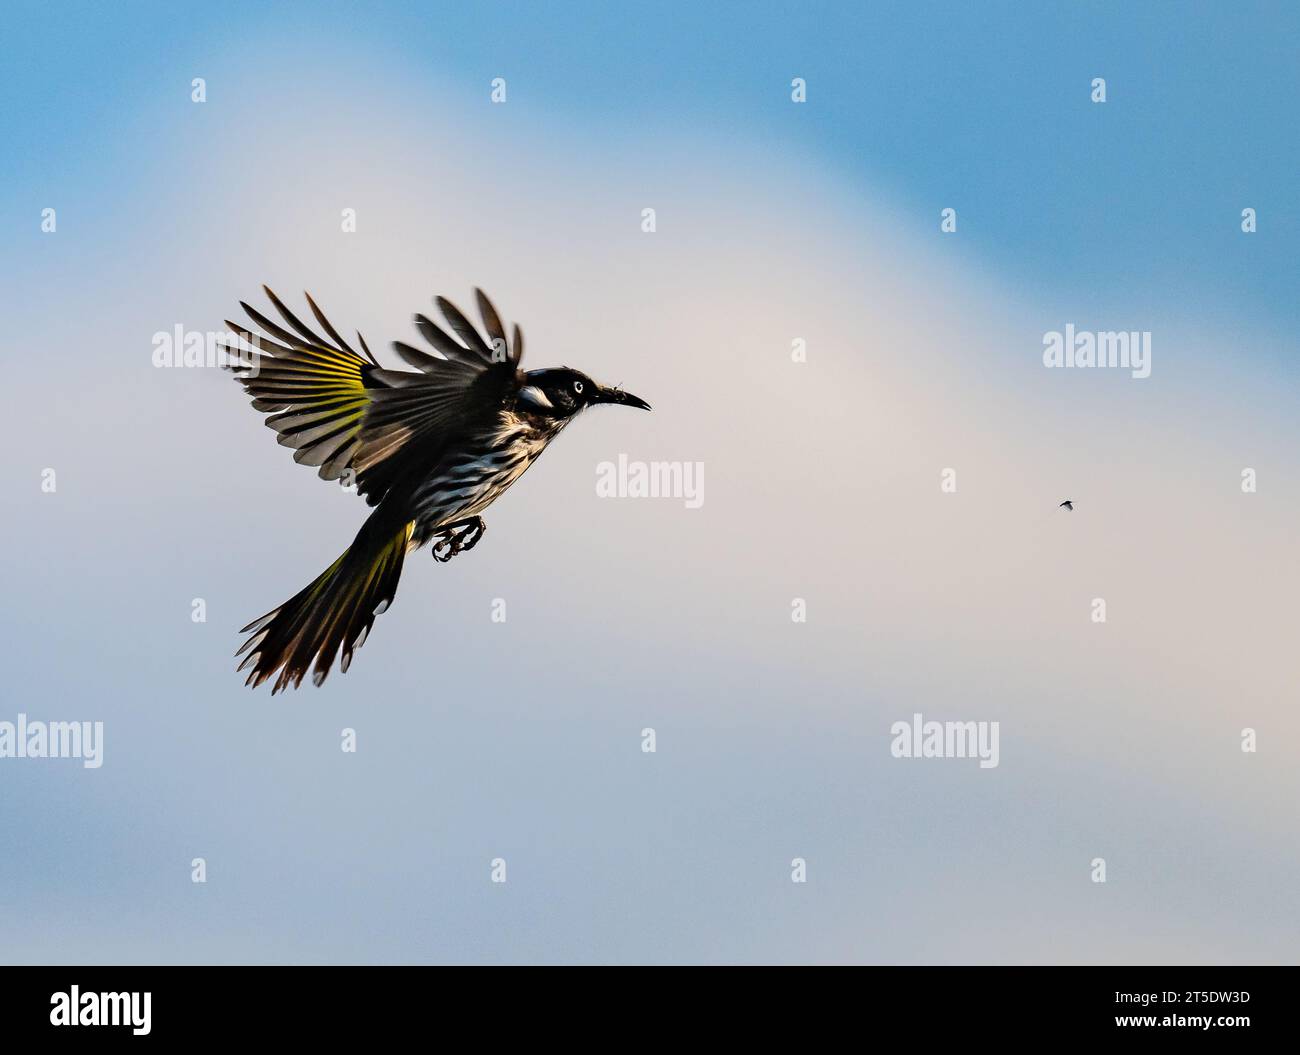 A New Holland Honeyeater (Phylidonyris novaehollandiae) chasing an insect in mid-air. Australia. Stock Photo